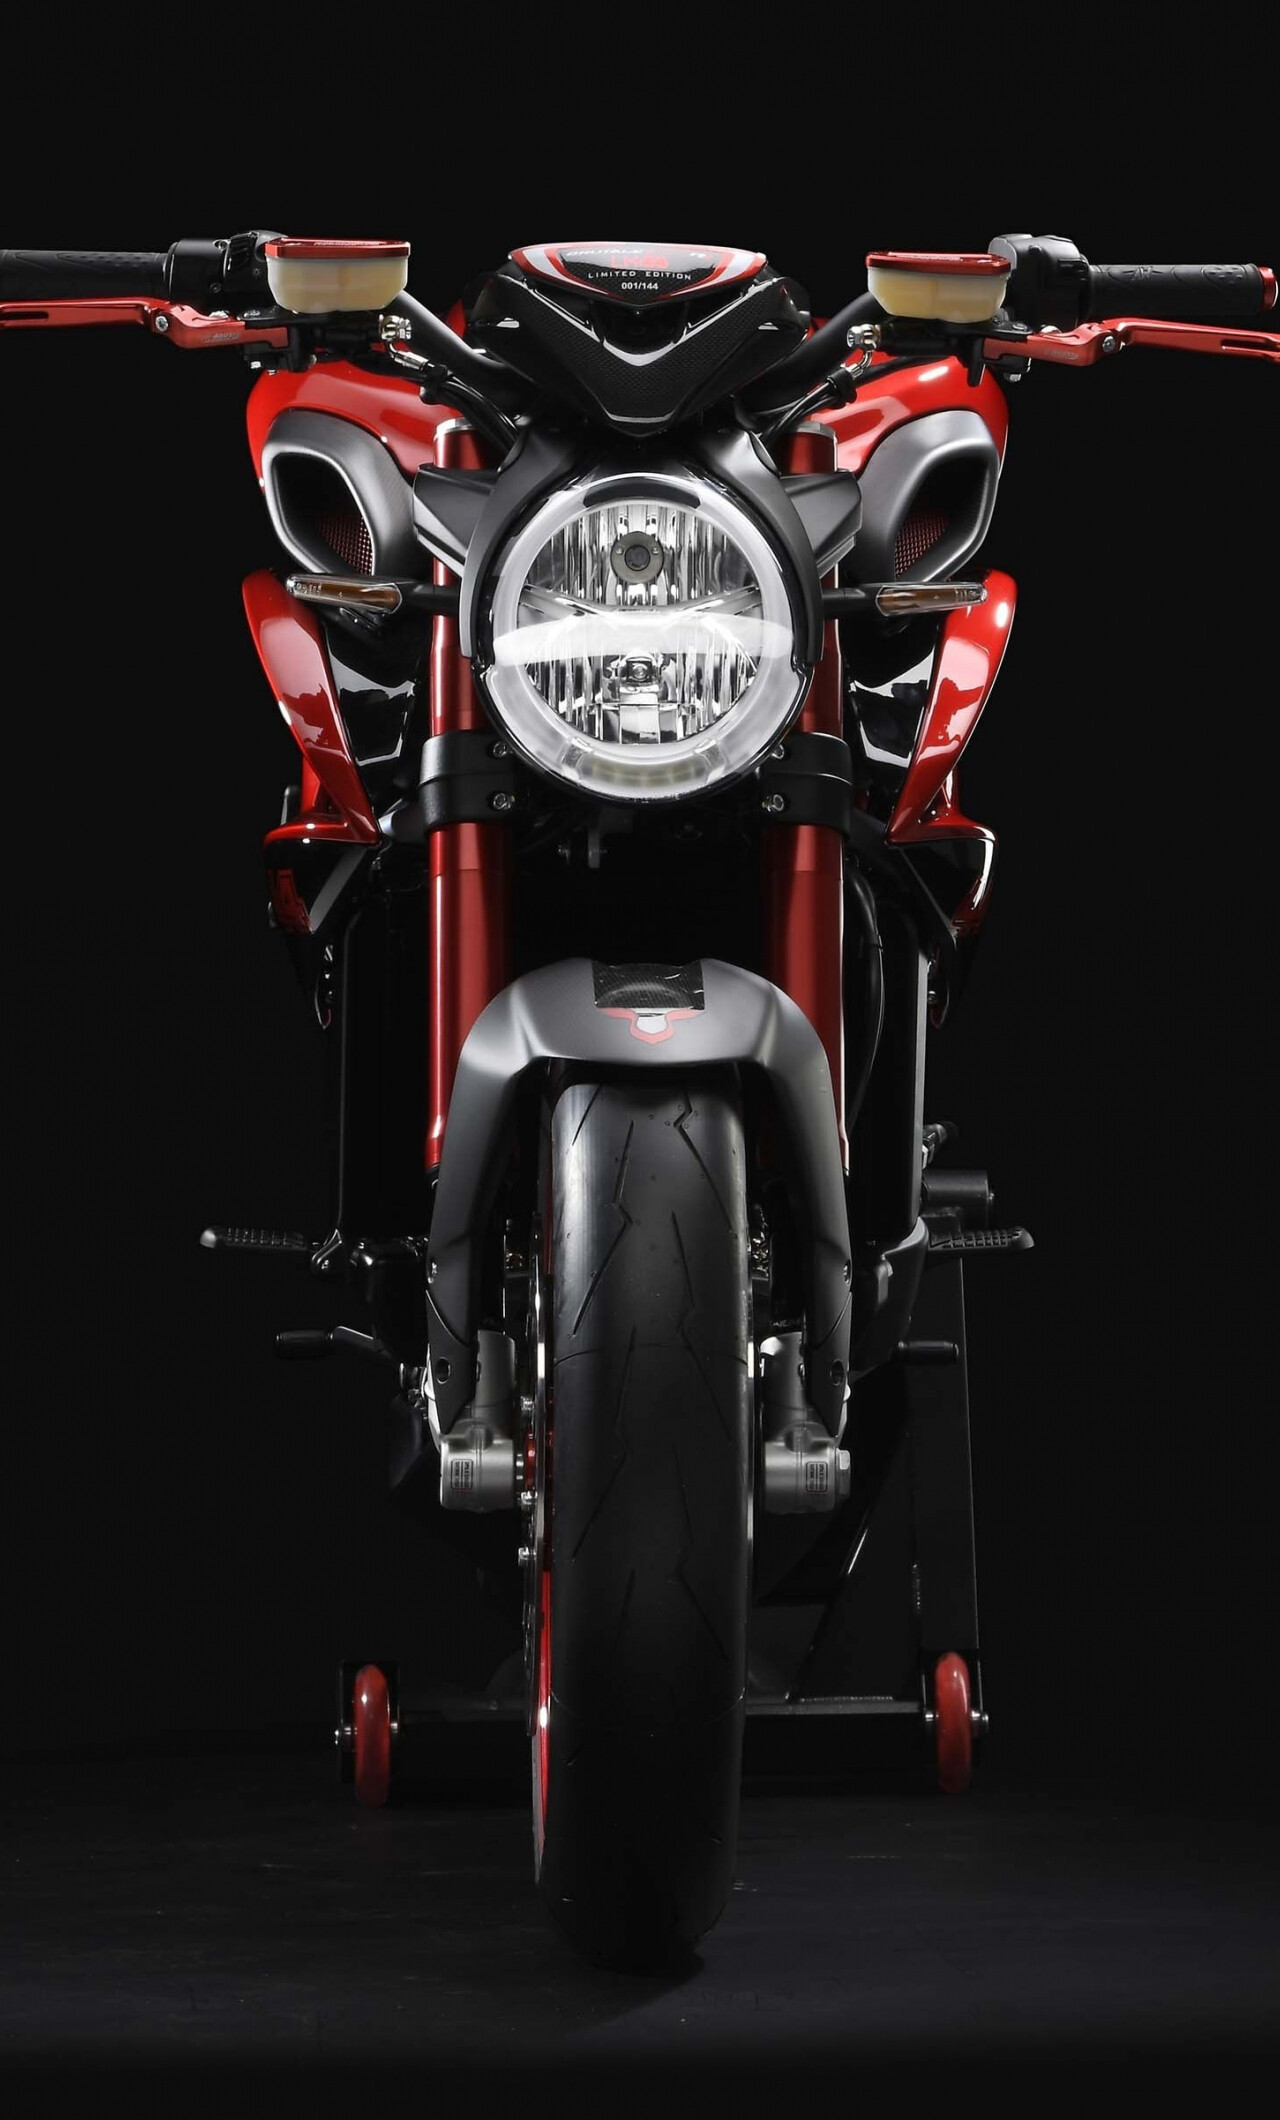 MV Agusta: Brutale 800 RR LH44 Lewis Hamilton, Produced in a limited series of only 144 units. 1280x2120 HD Wallpaper.